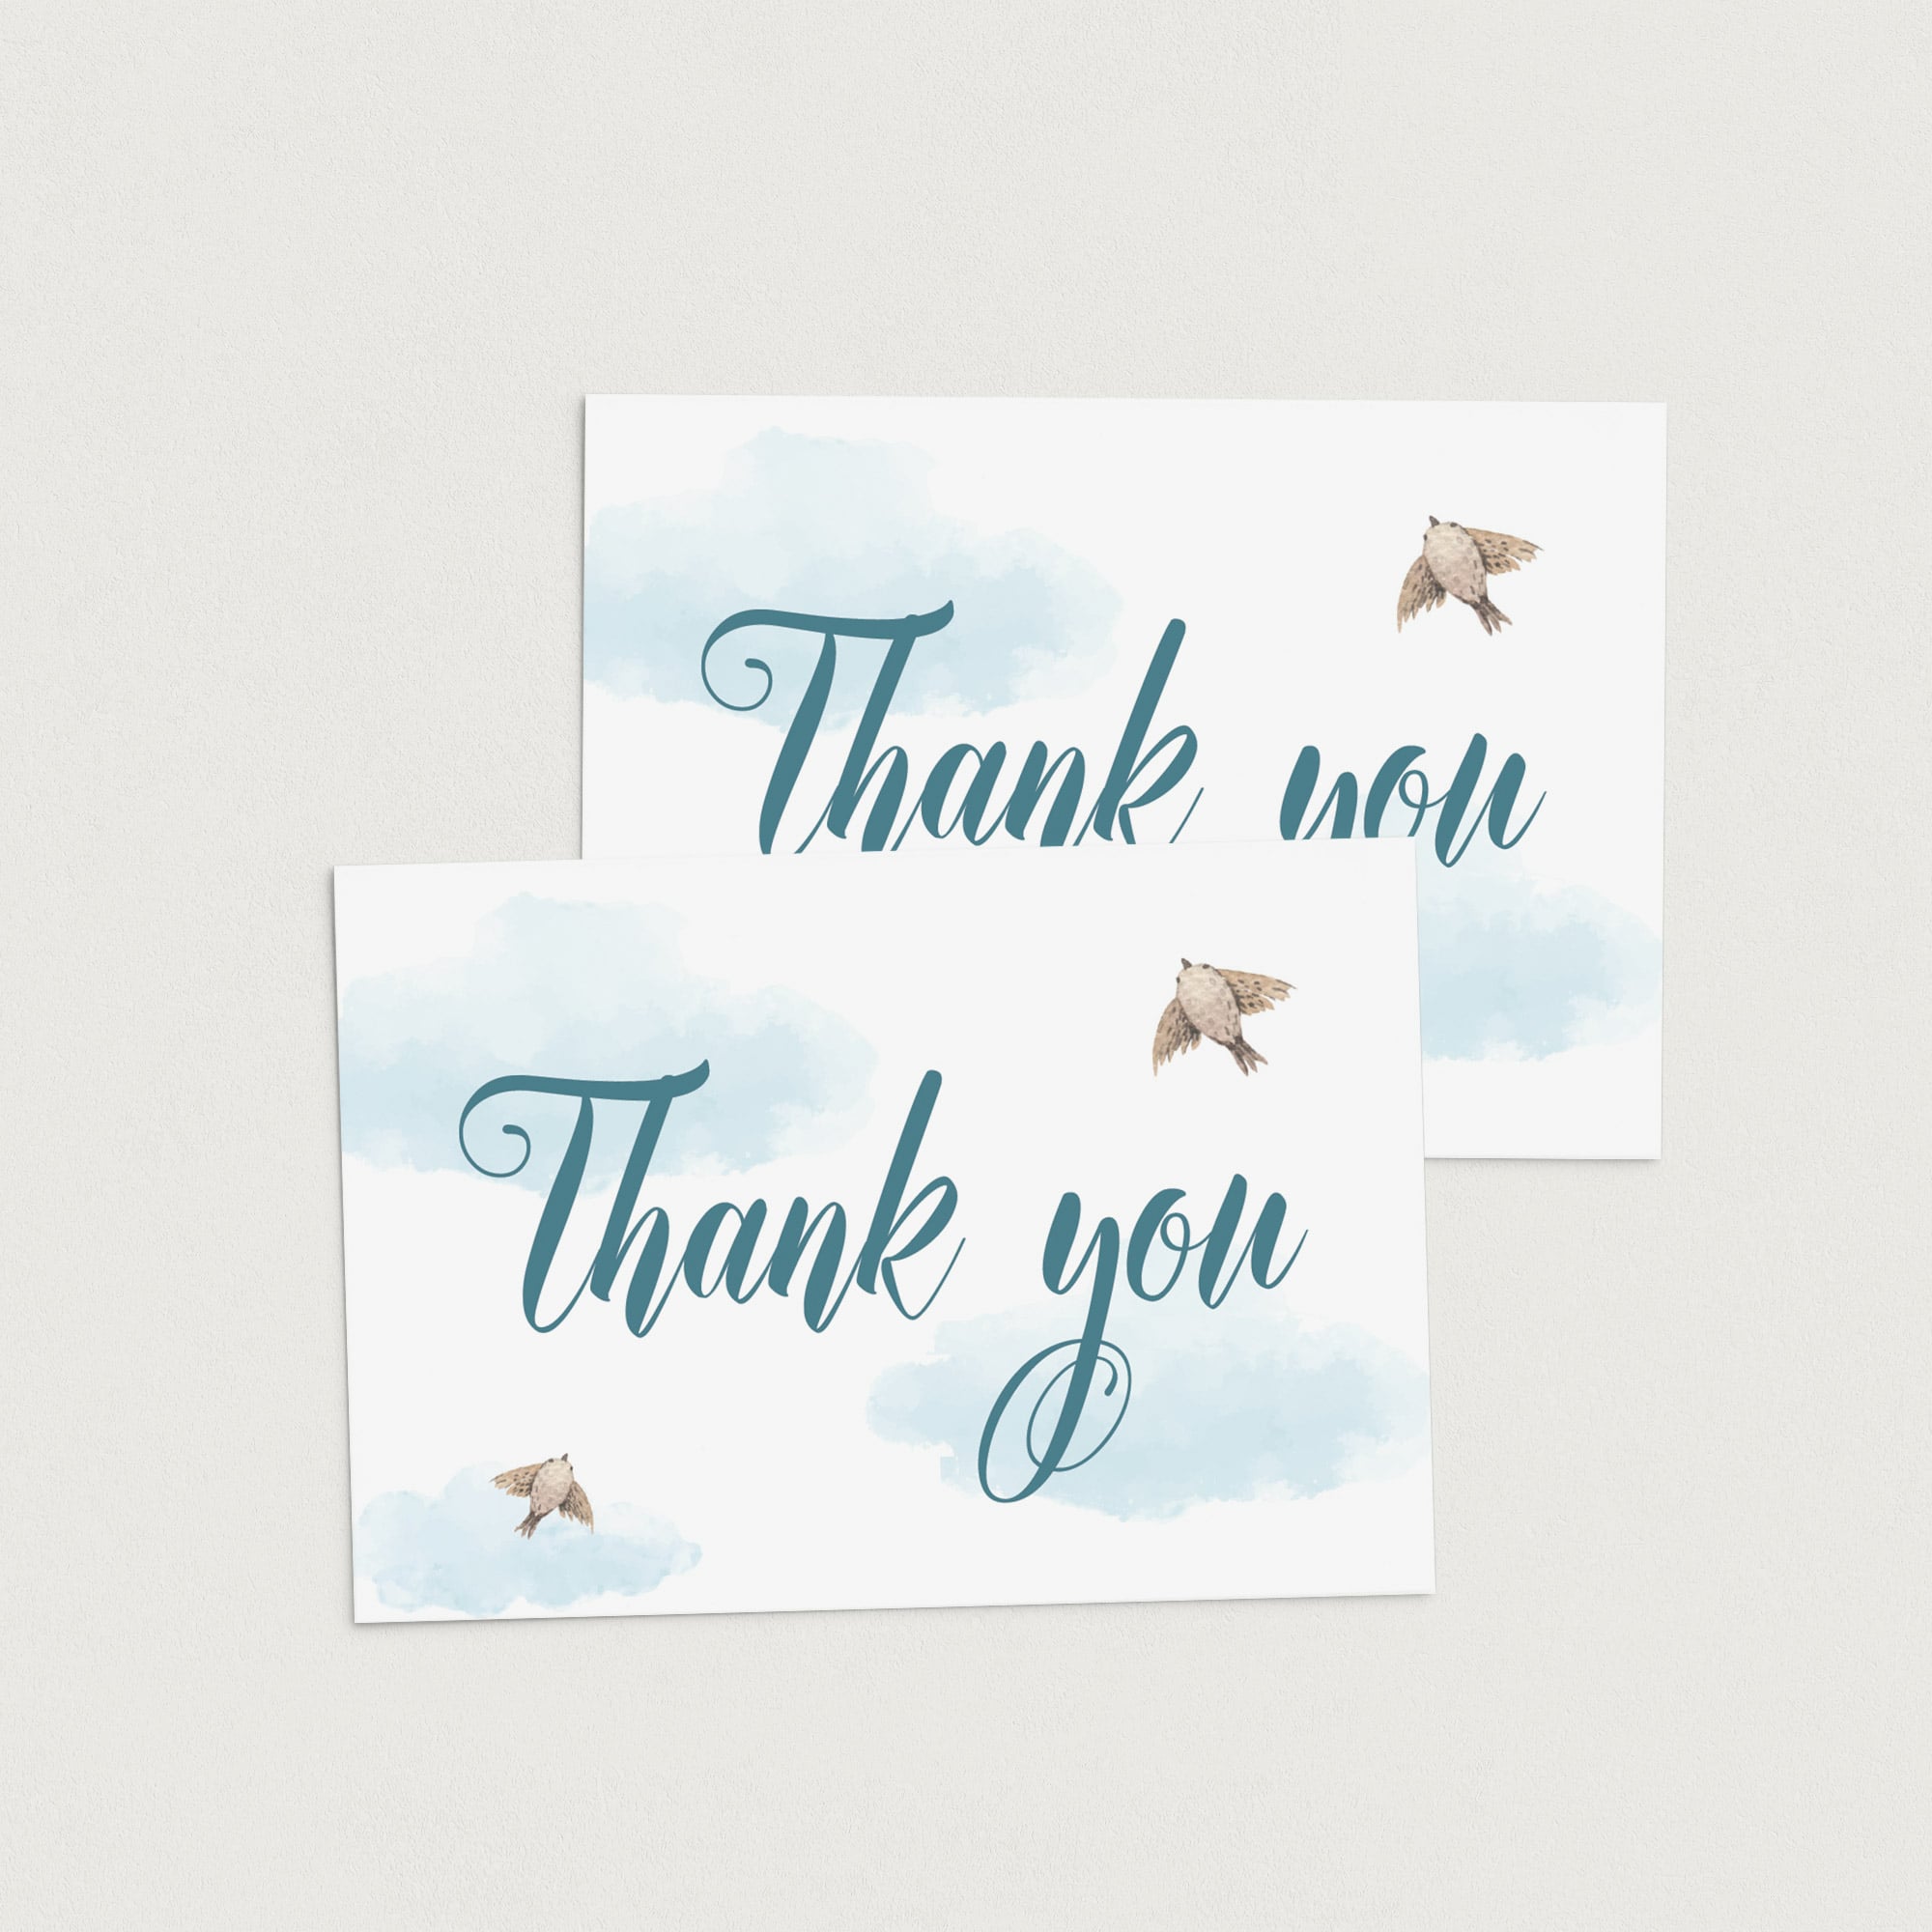 Air themed party thank you cards with watercolor clouds by LittleSizzle